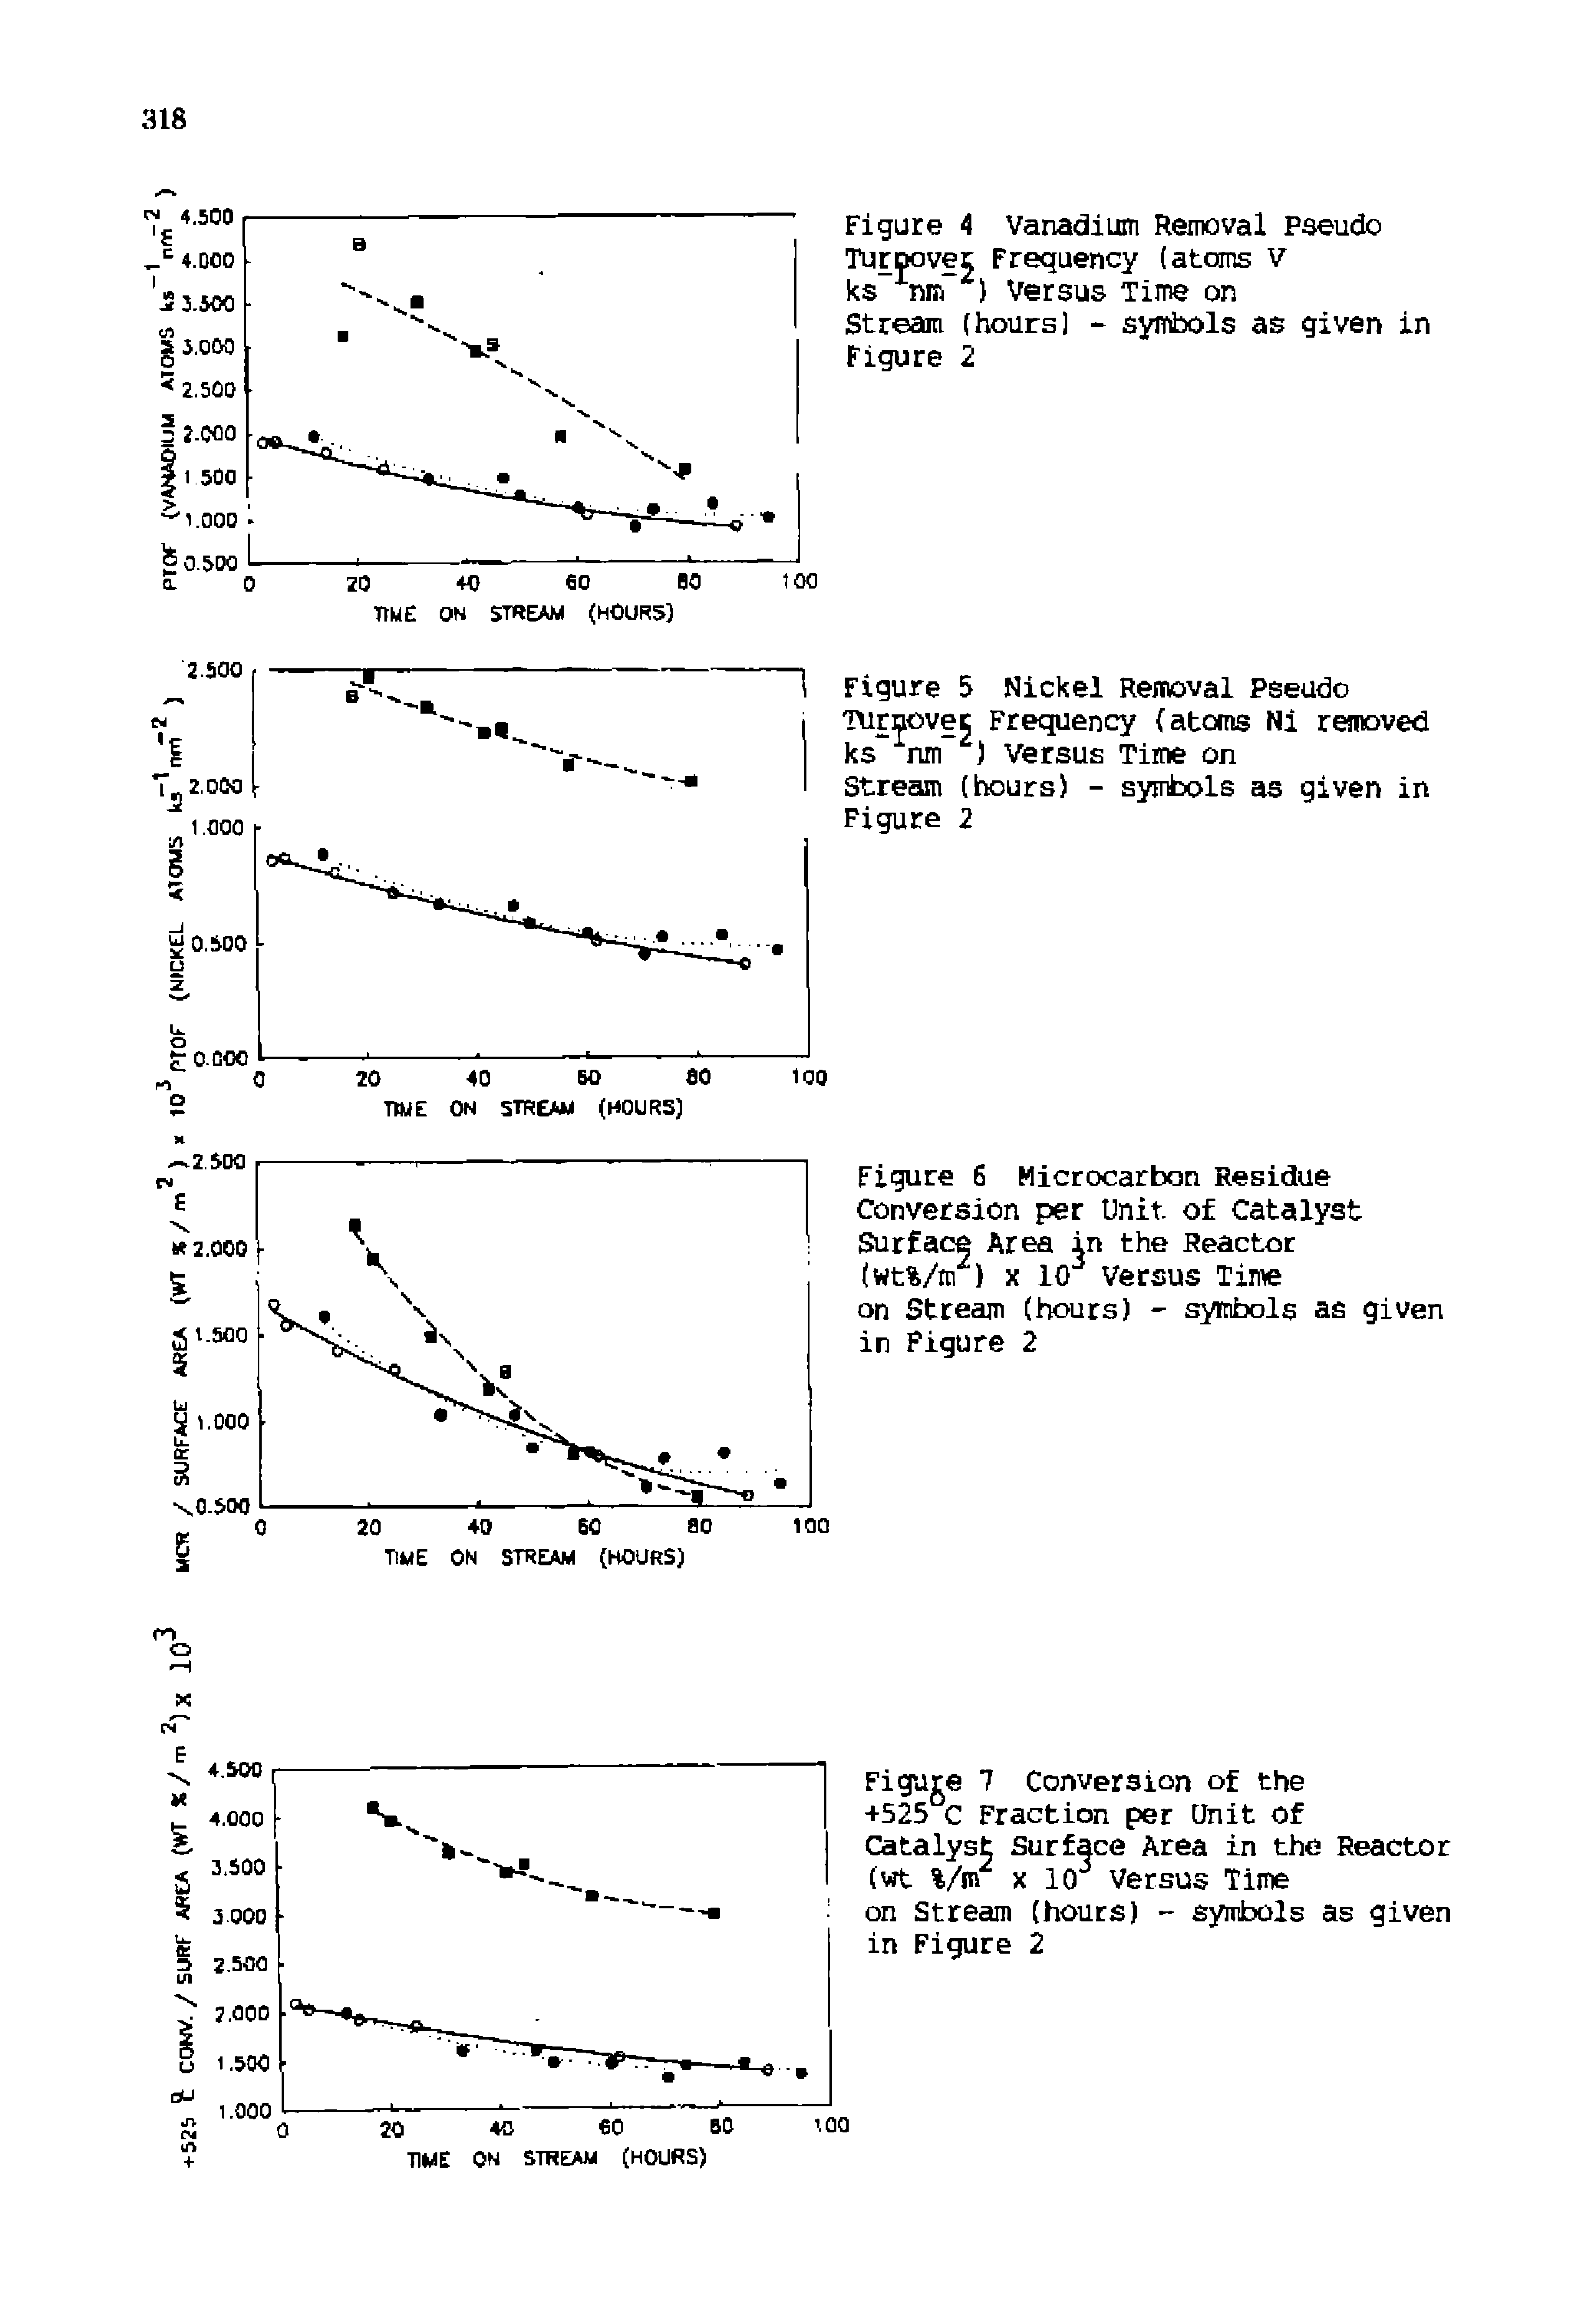 Figure 4 Vanadium Removal Pseudo TurDover Frequency (atoms V ks nm Versus Time on Stream (hours) - symbols as given in Figure 2...